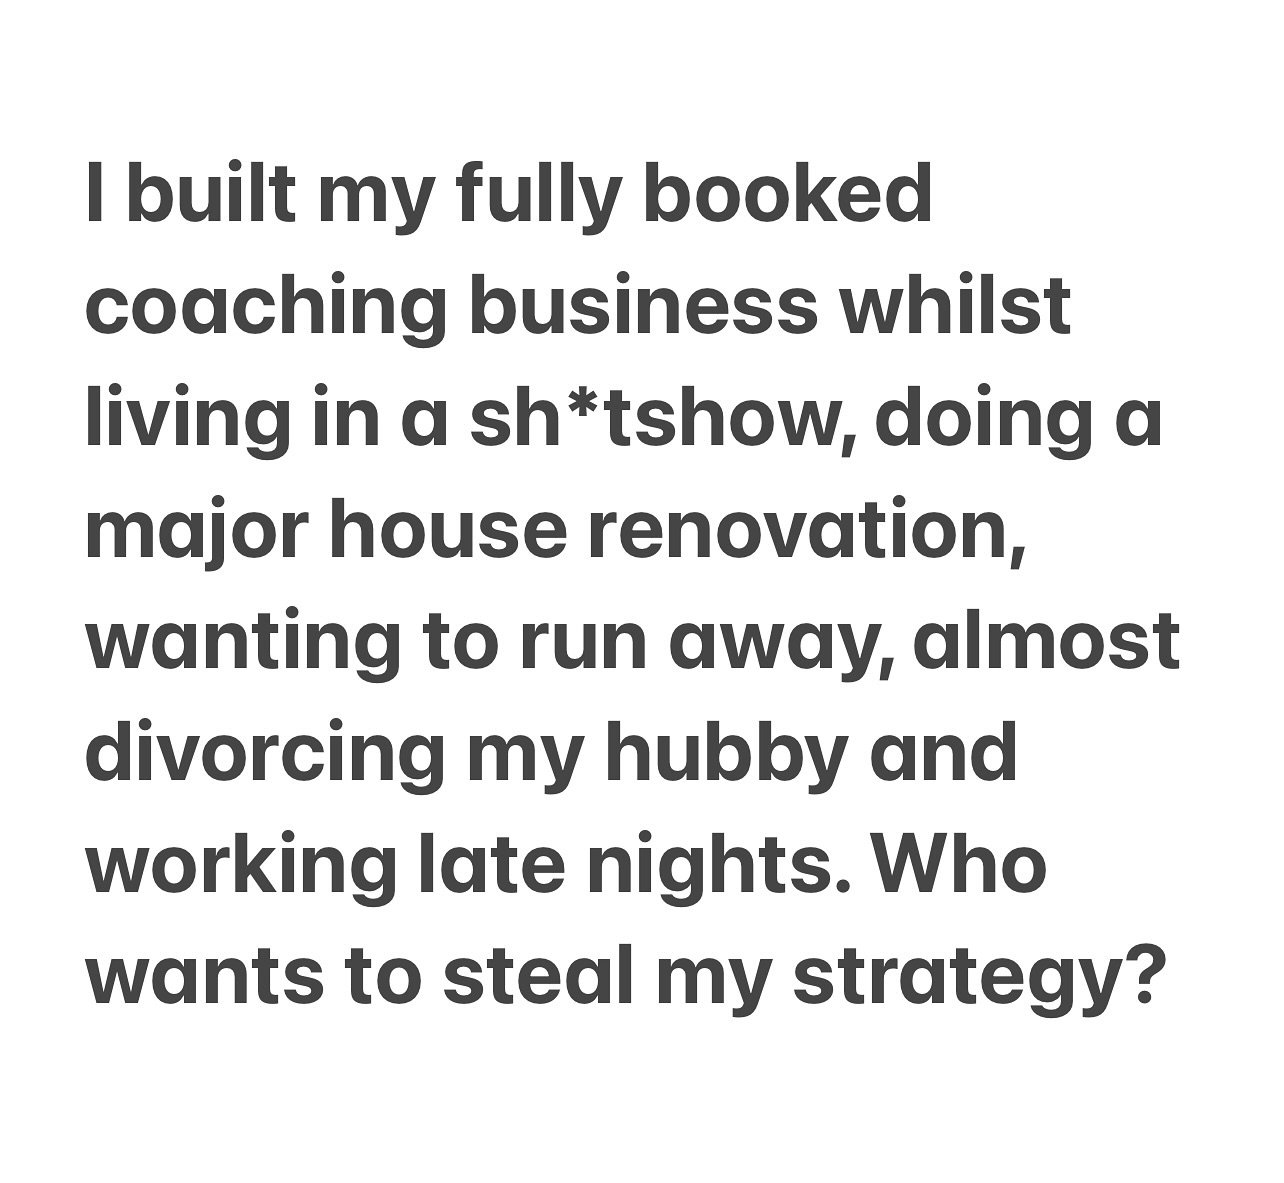 🤣🤣🤣

Girl getting sick of seeing the same old crap being regurgitated! 

I was browsing some FB groups last night and it&rsquo;s ALL the same&hellip;.

It is soooooo easy to make crazy claims in the coaching industry which ethical business owners 